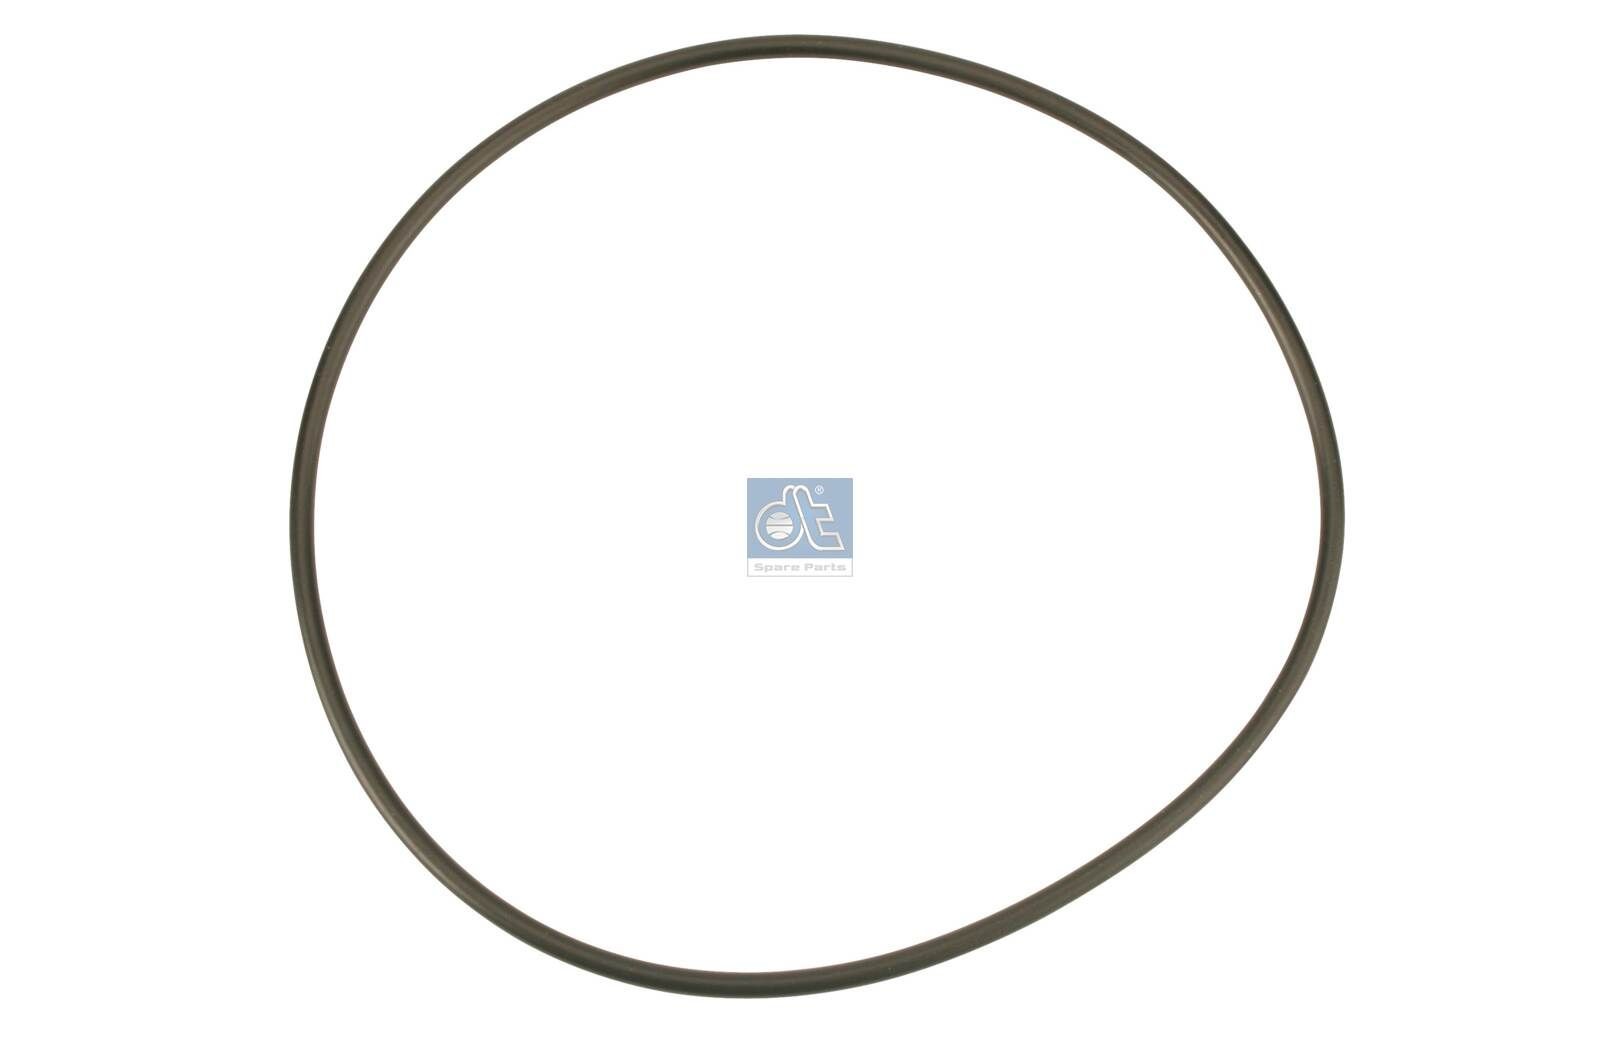 DT Spare Parts 5.41105 Seal Ring 130 x 3,5 mm, O-Ring, NBR (nitrile butadiene rubber)